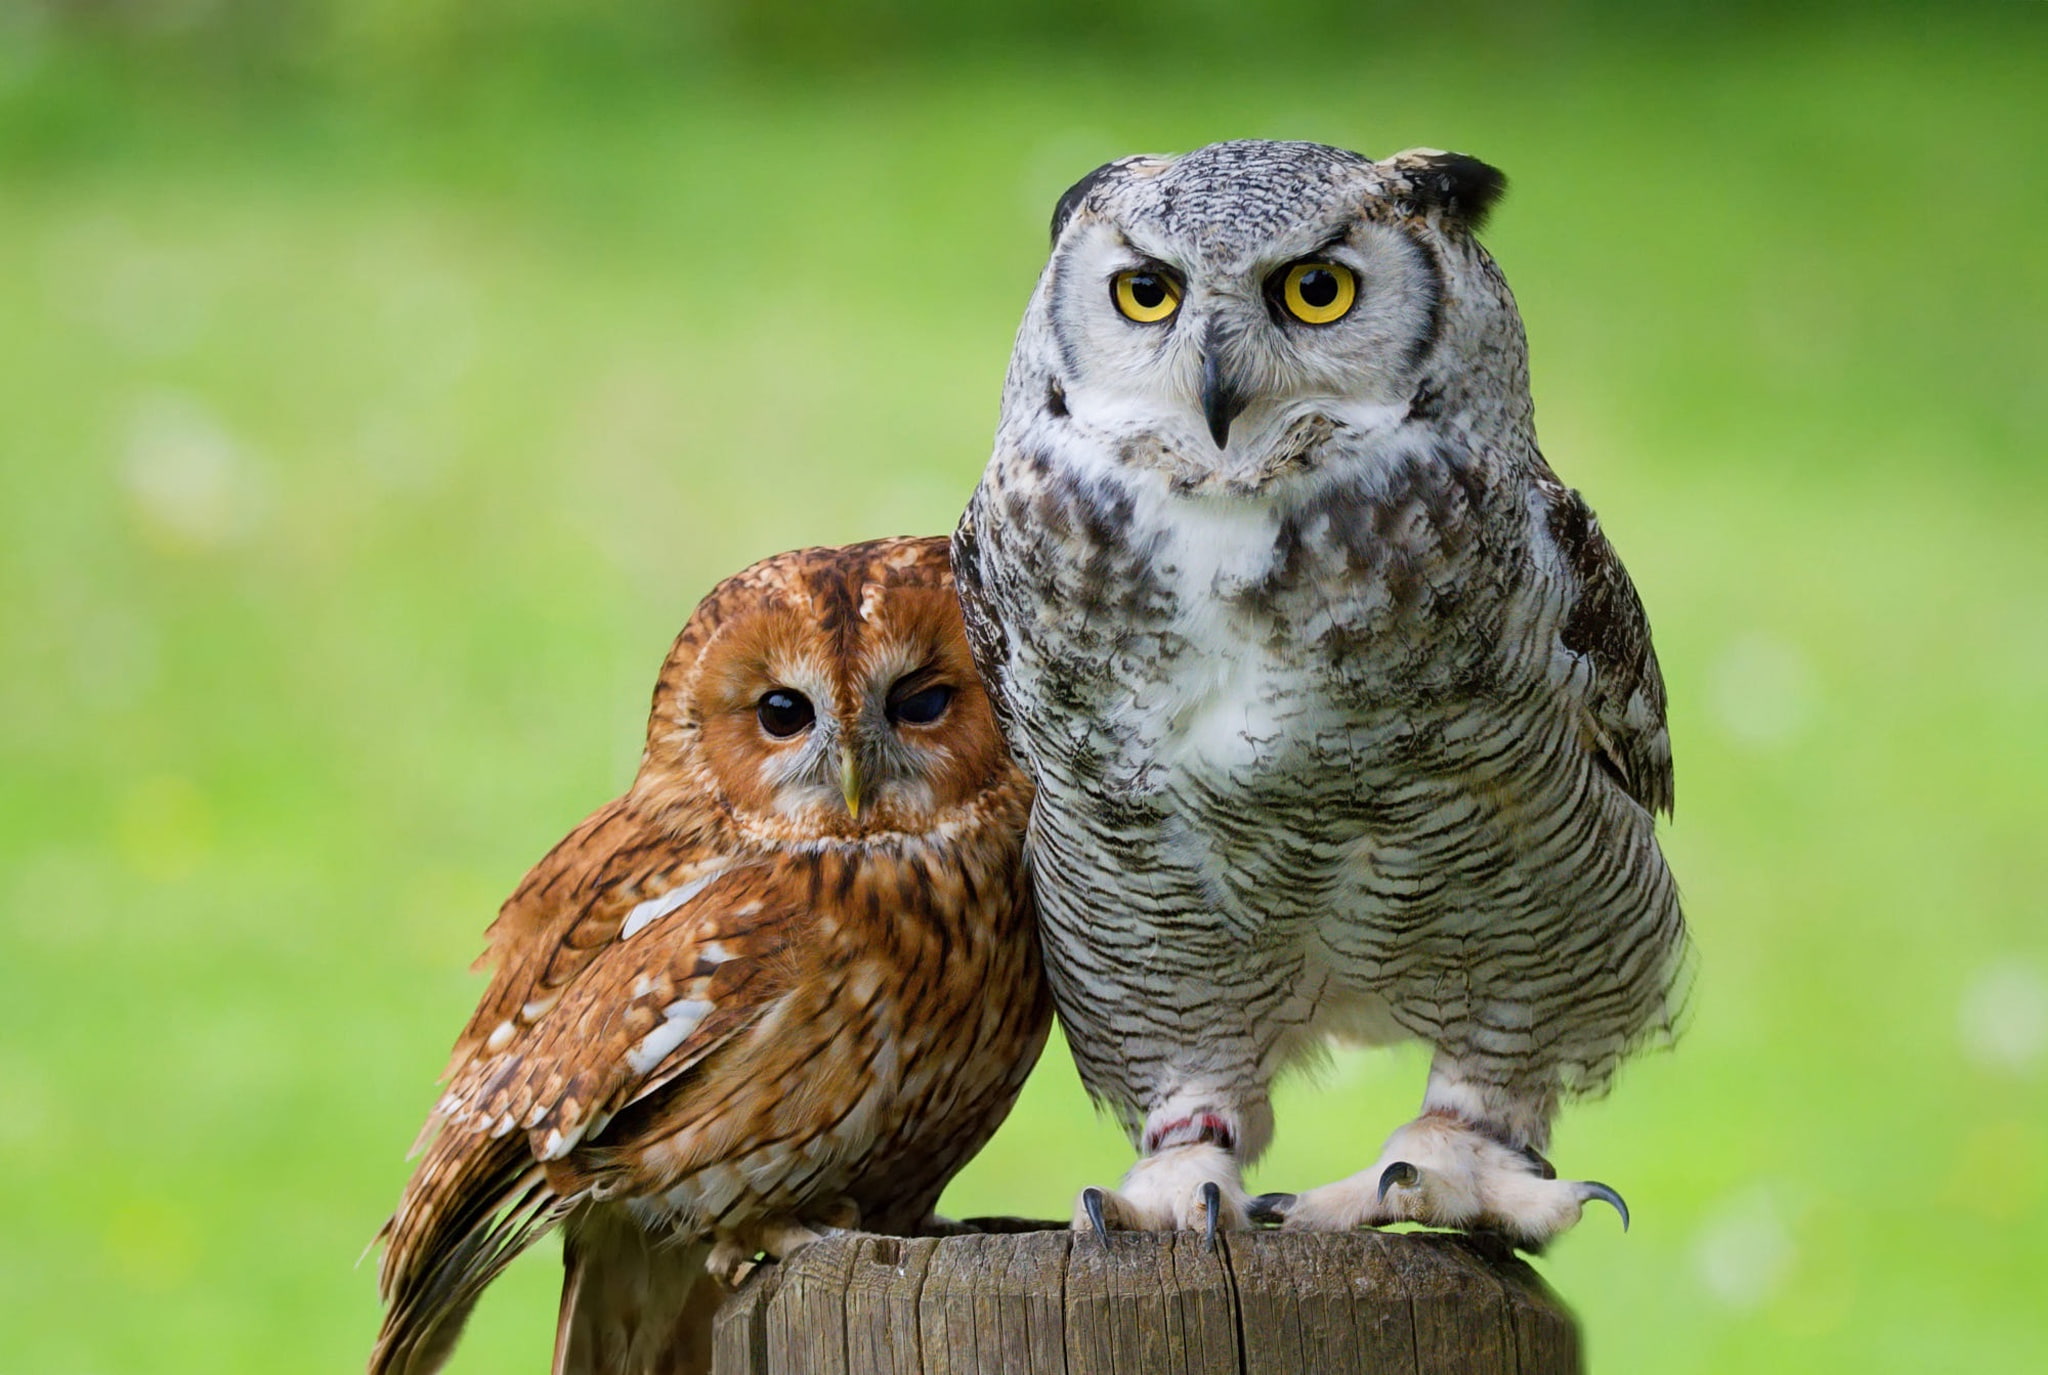 eyes, look, birds, green, background, owl, together, two, stump